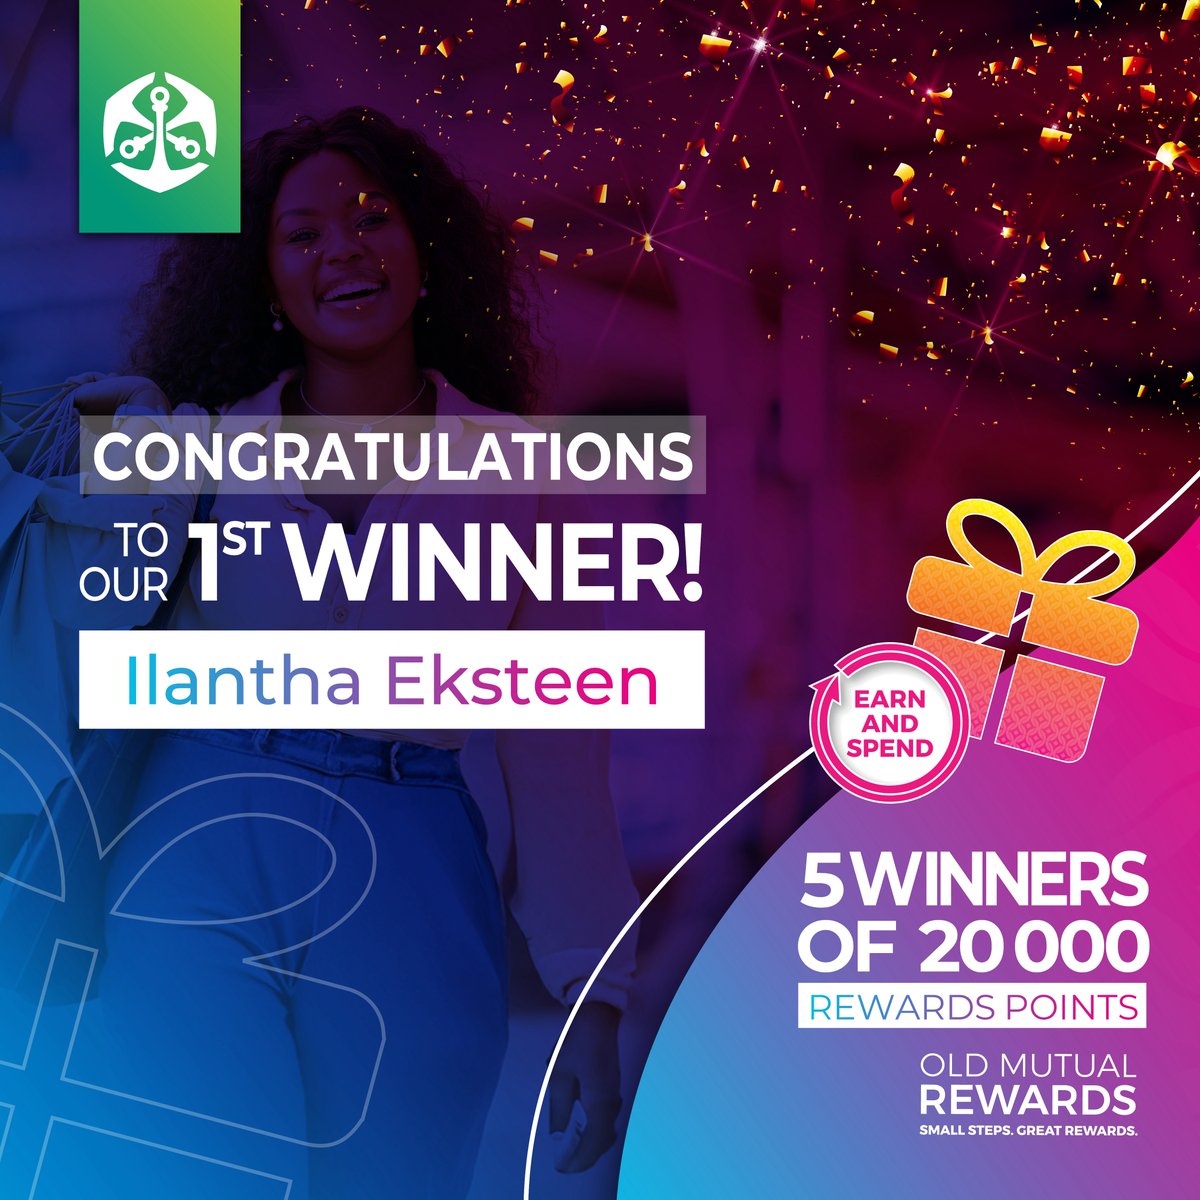 🎉 Congratulations to our first winner of 20 000 rewards points worth N$2 000! 🌟 Your decision to join Old Mutual Rewards has paid off big time! 💰 Keep an eye on your inbox for more details on how to claim your prize. #RewardsRush #WinnerWinner